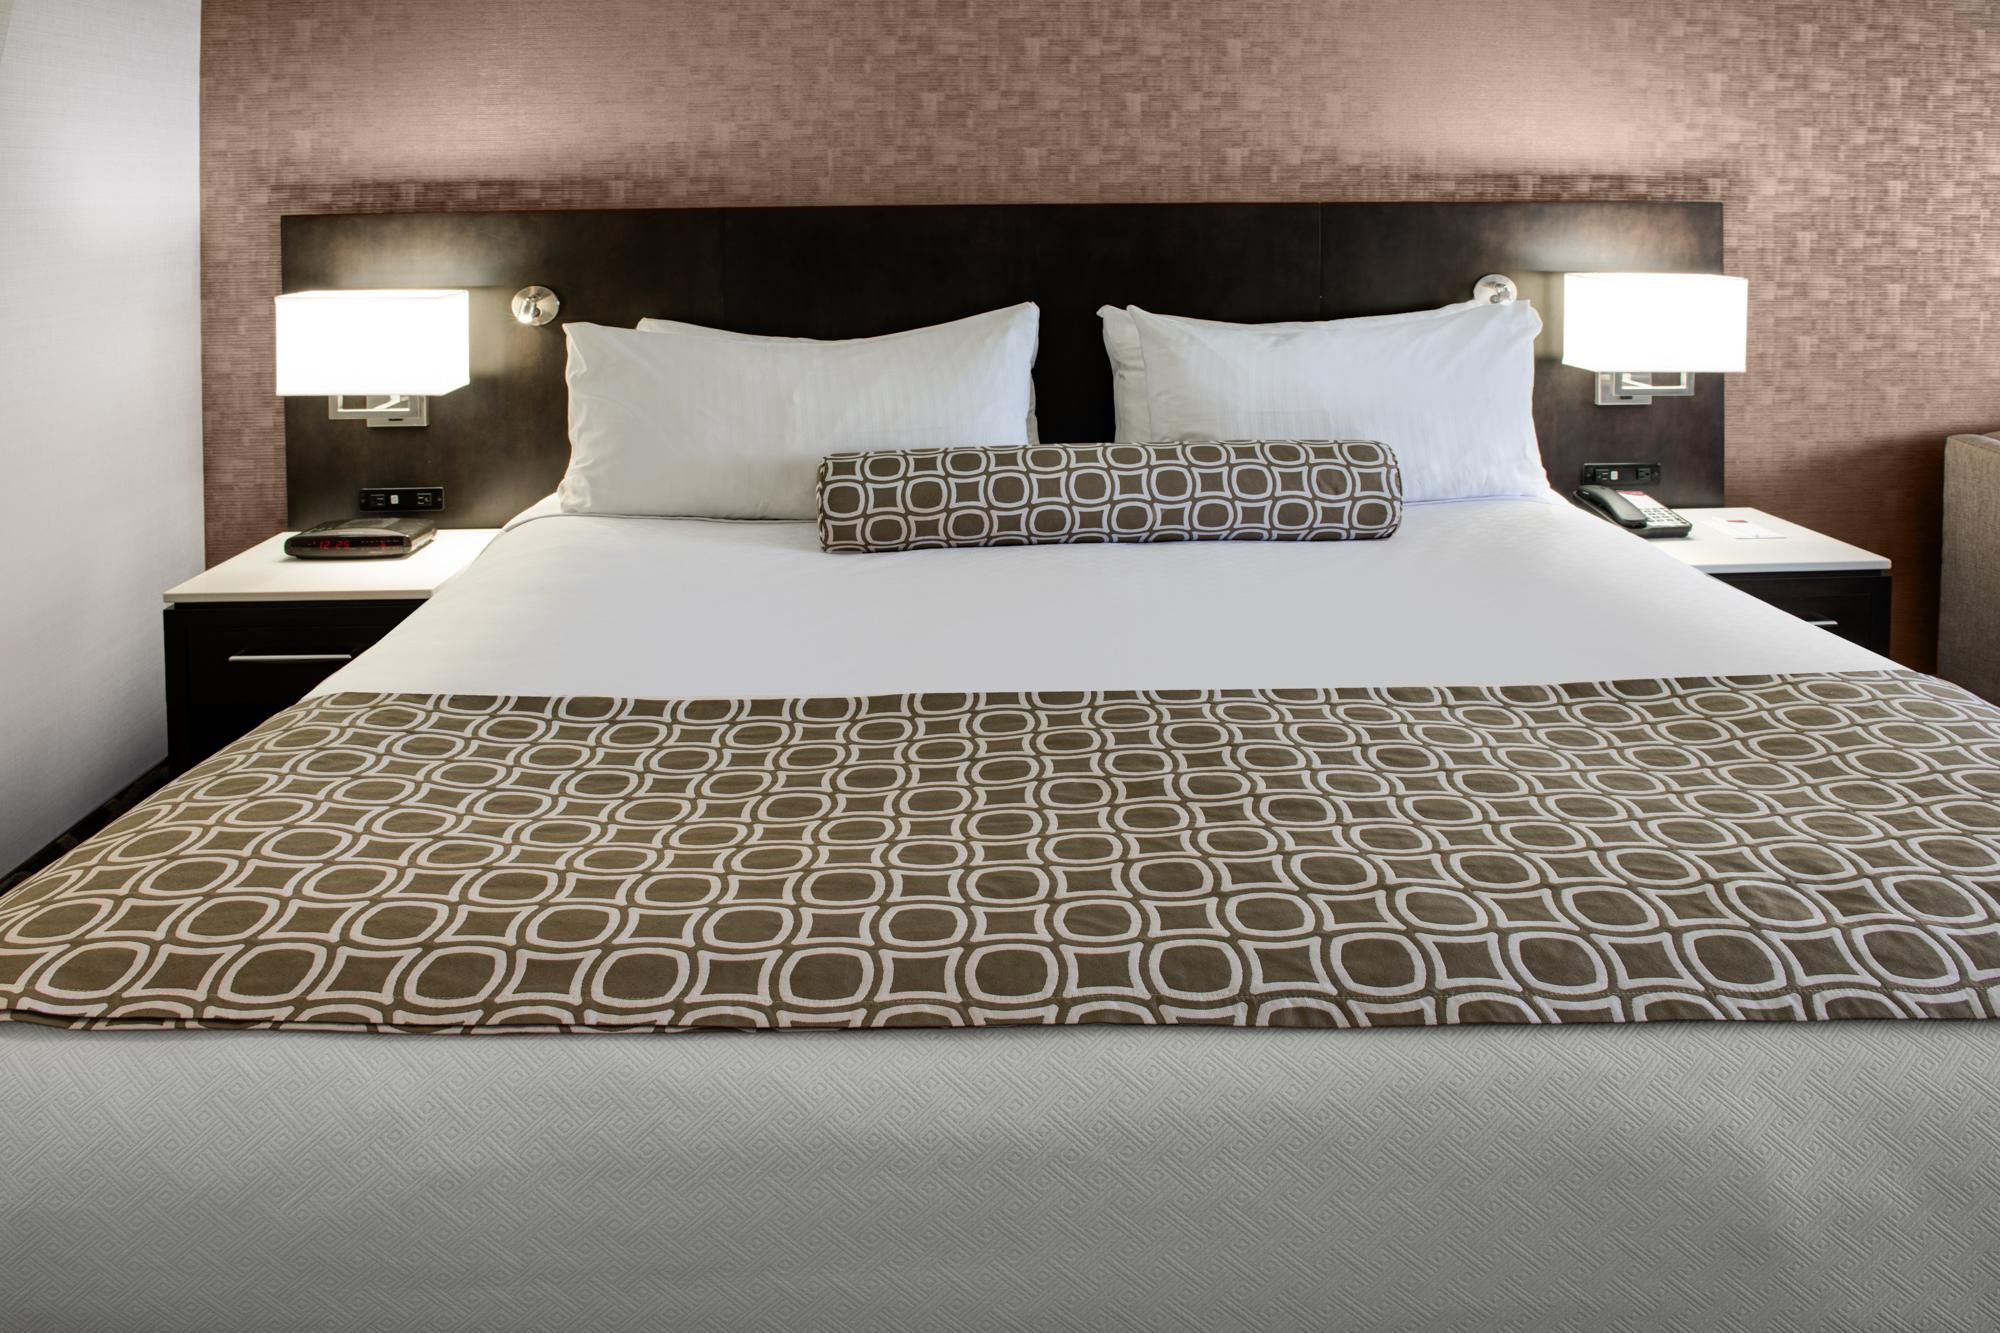 Rest easy with our luxury bedding